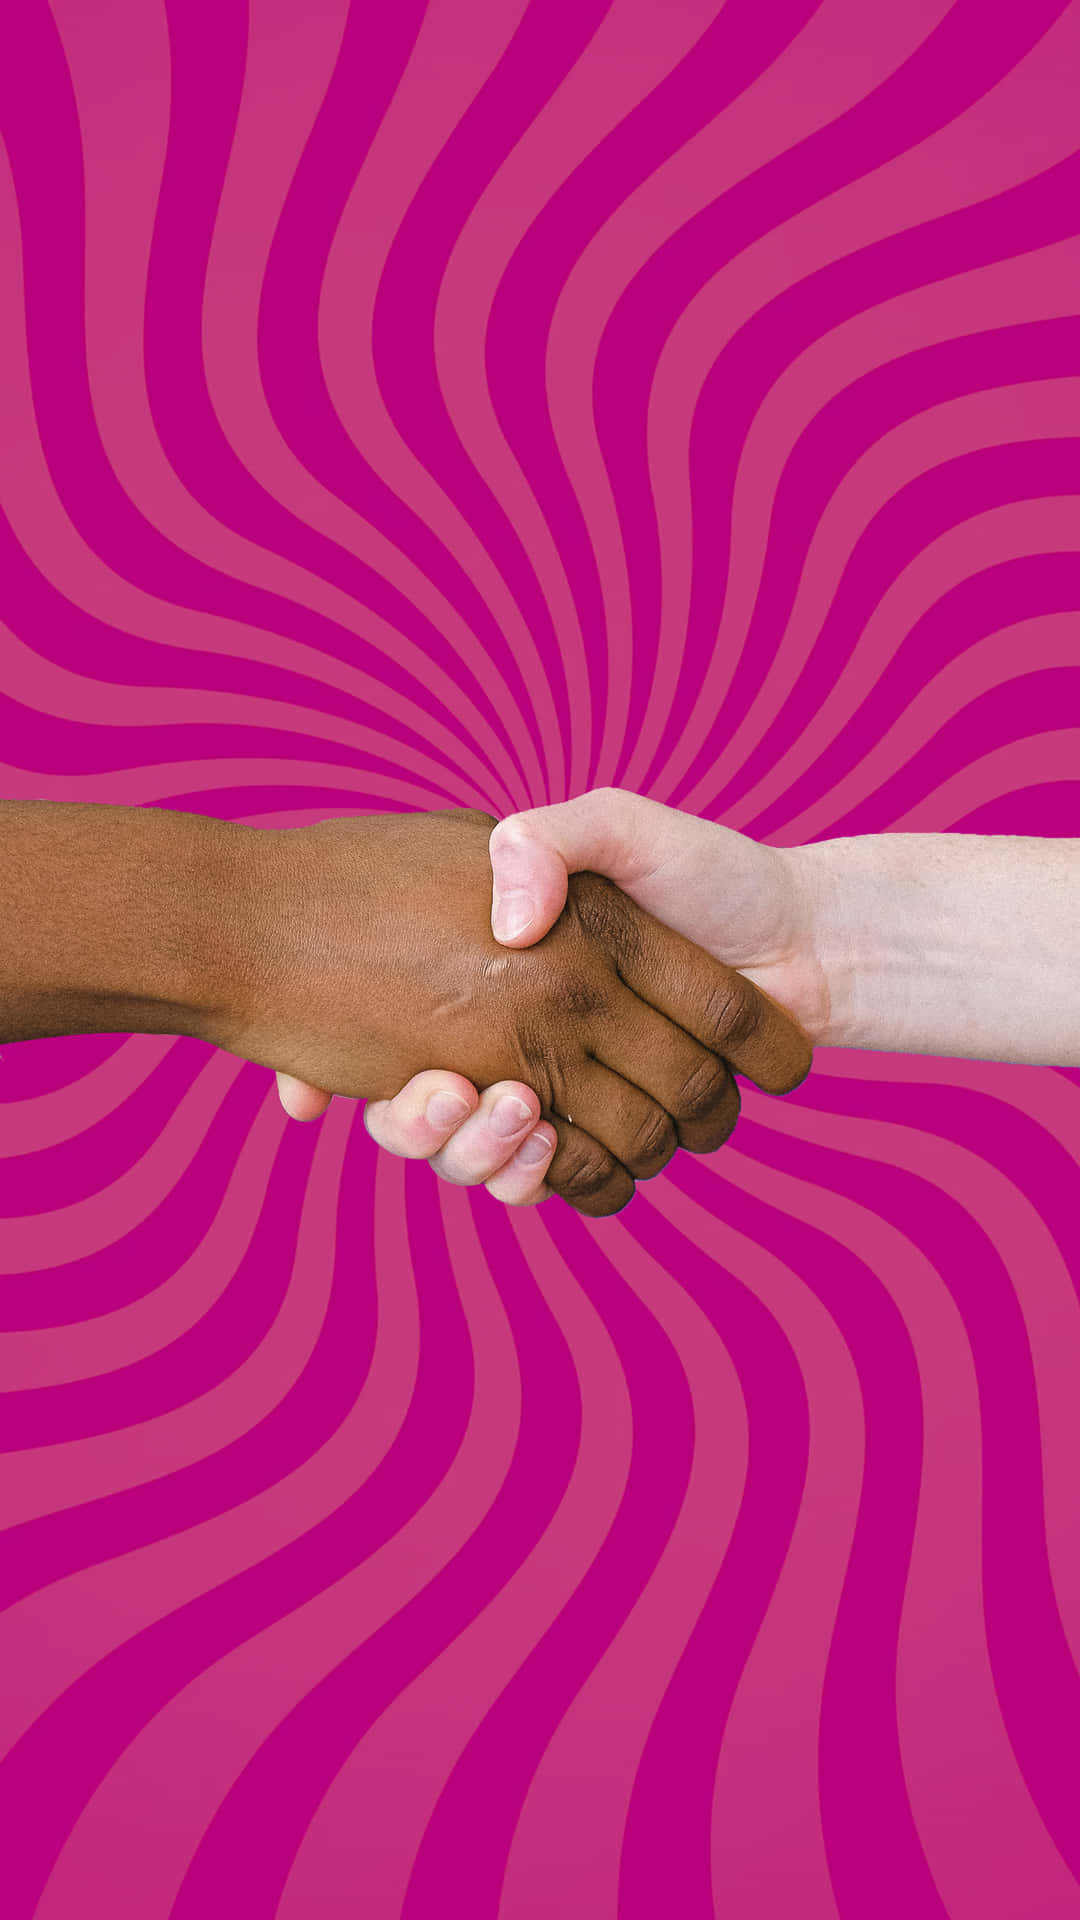 Business Handshake on a Pink Background Wallpaper